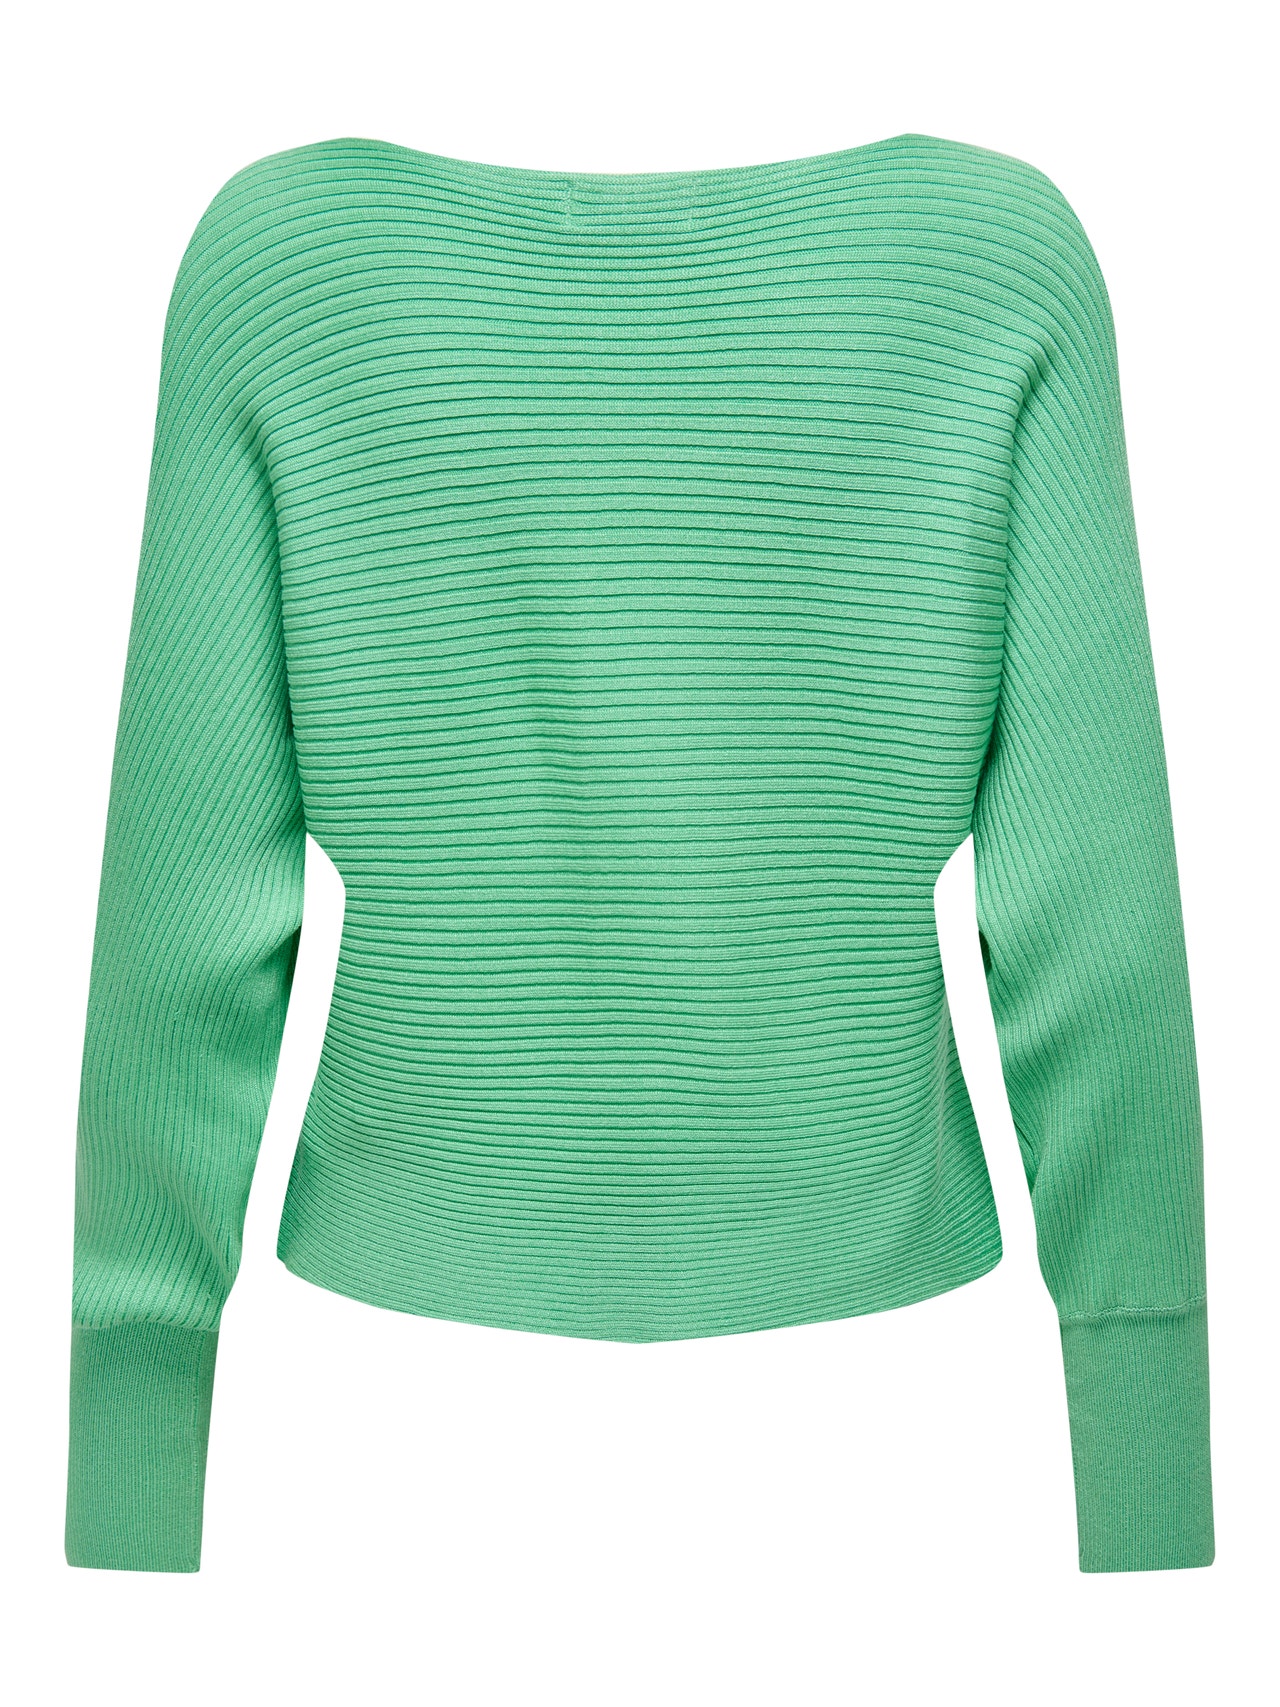 ONLY Short Knitted Pullover -Jade Cream - 15226298